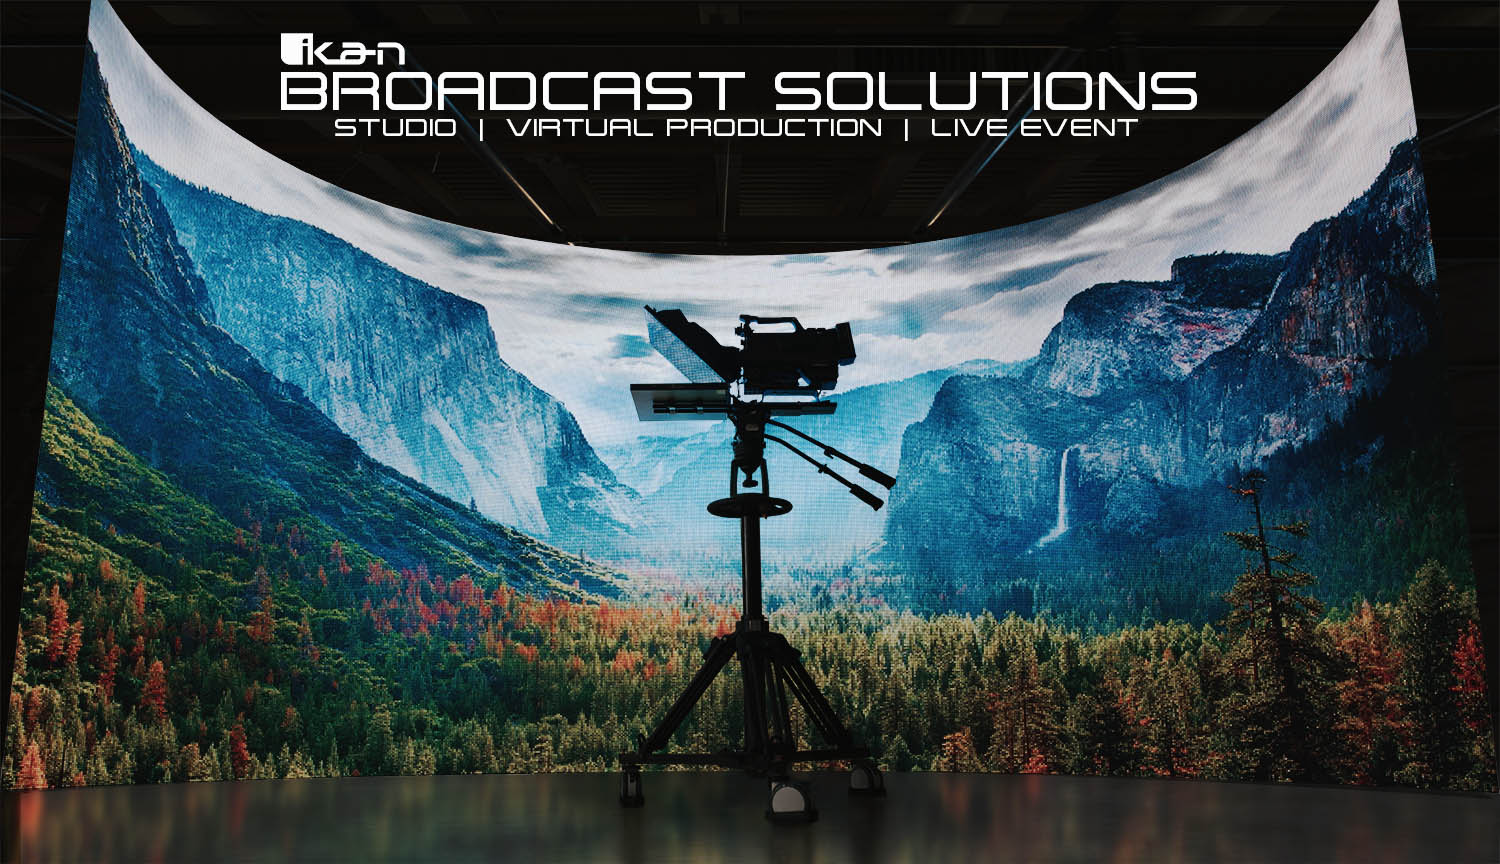 ikan broadcast turnkey solution that includes a teleprompter, pedestal, and dolly, in front of an LED volume for virtual production